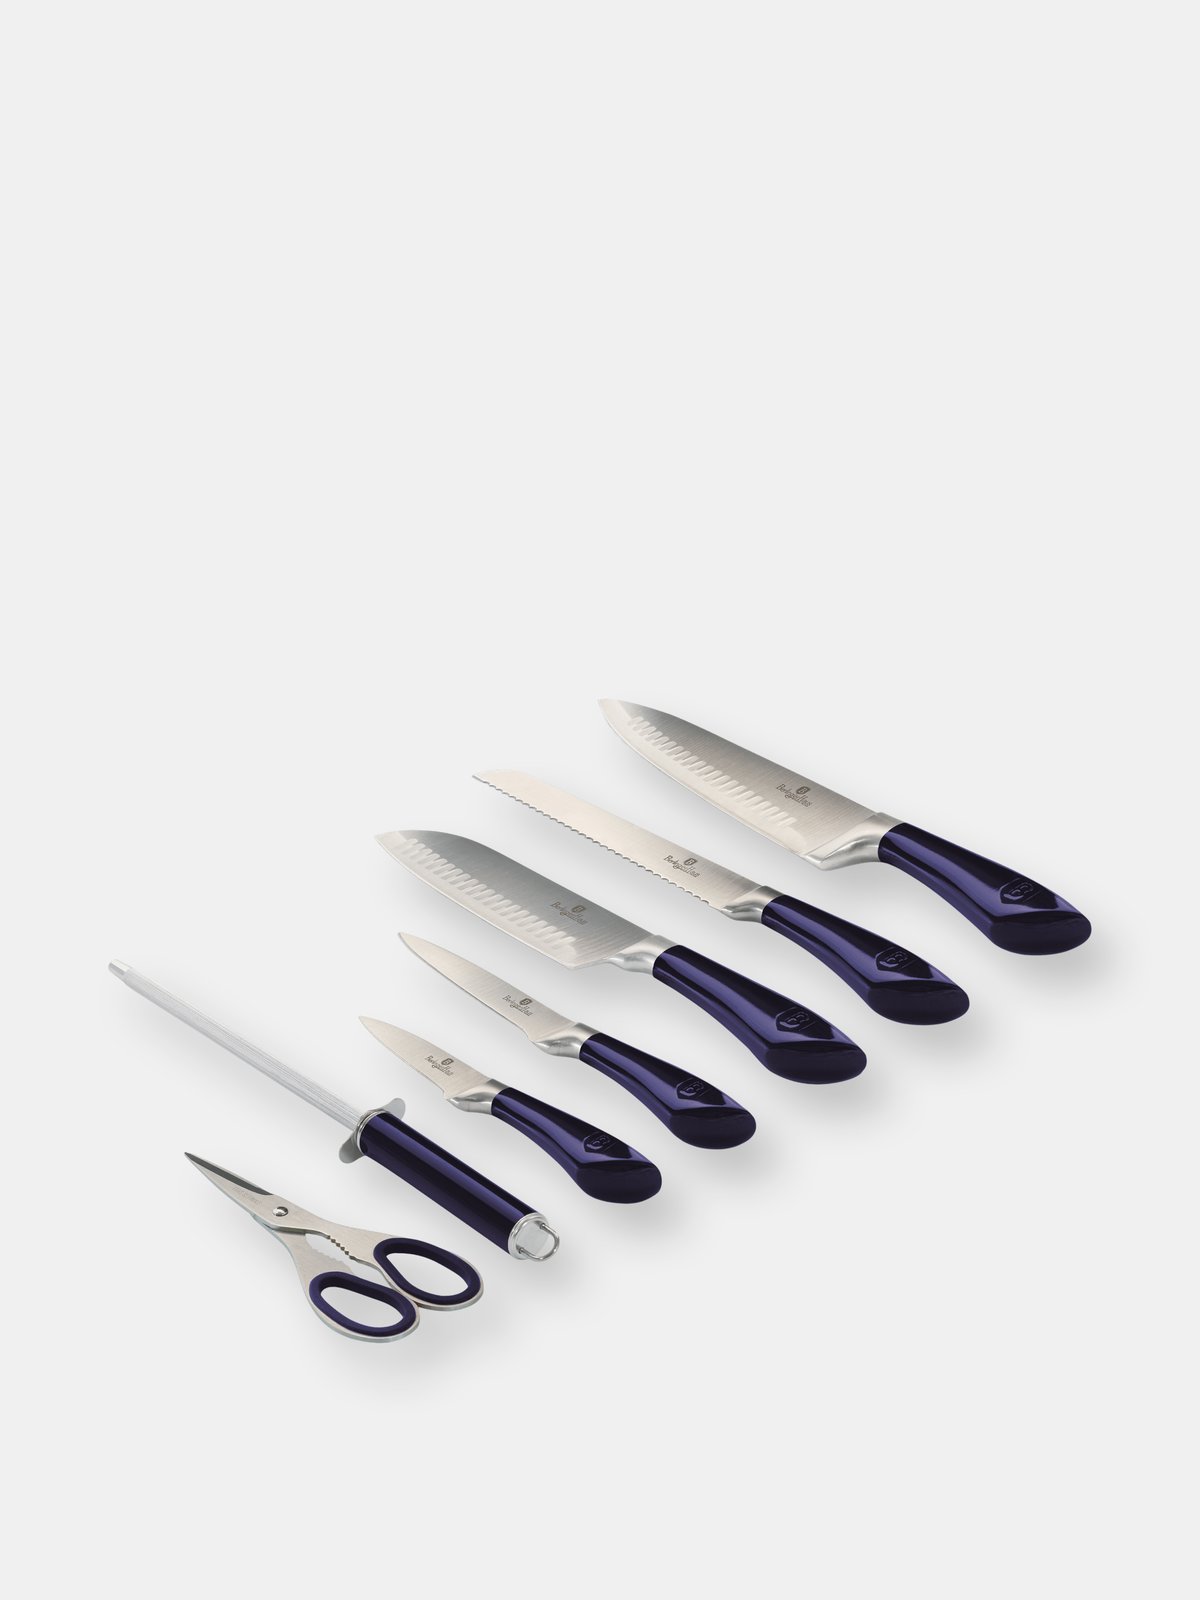 Berlinger Haus 8-Piece Knife Set with Acrylic Stand - Purple